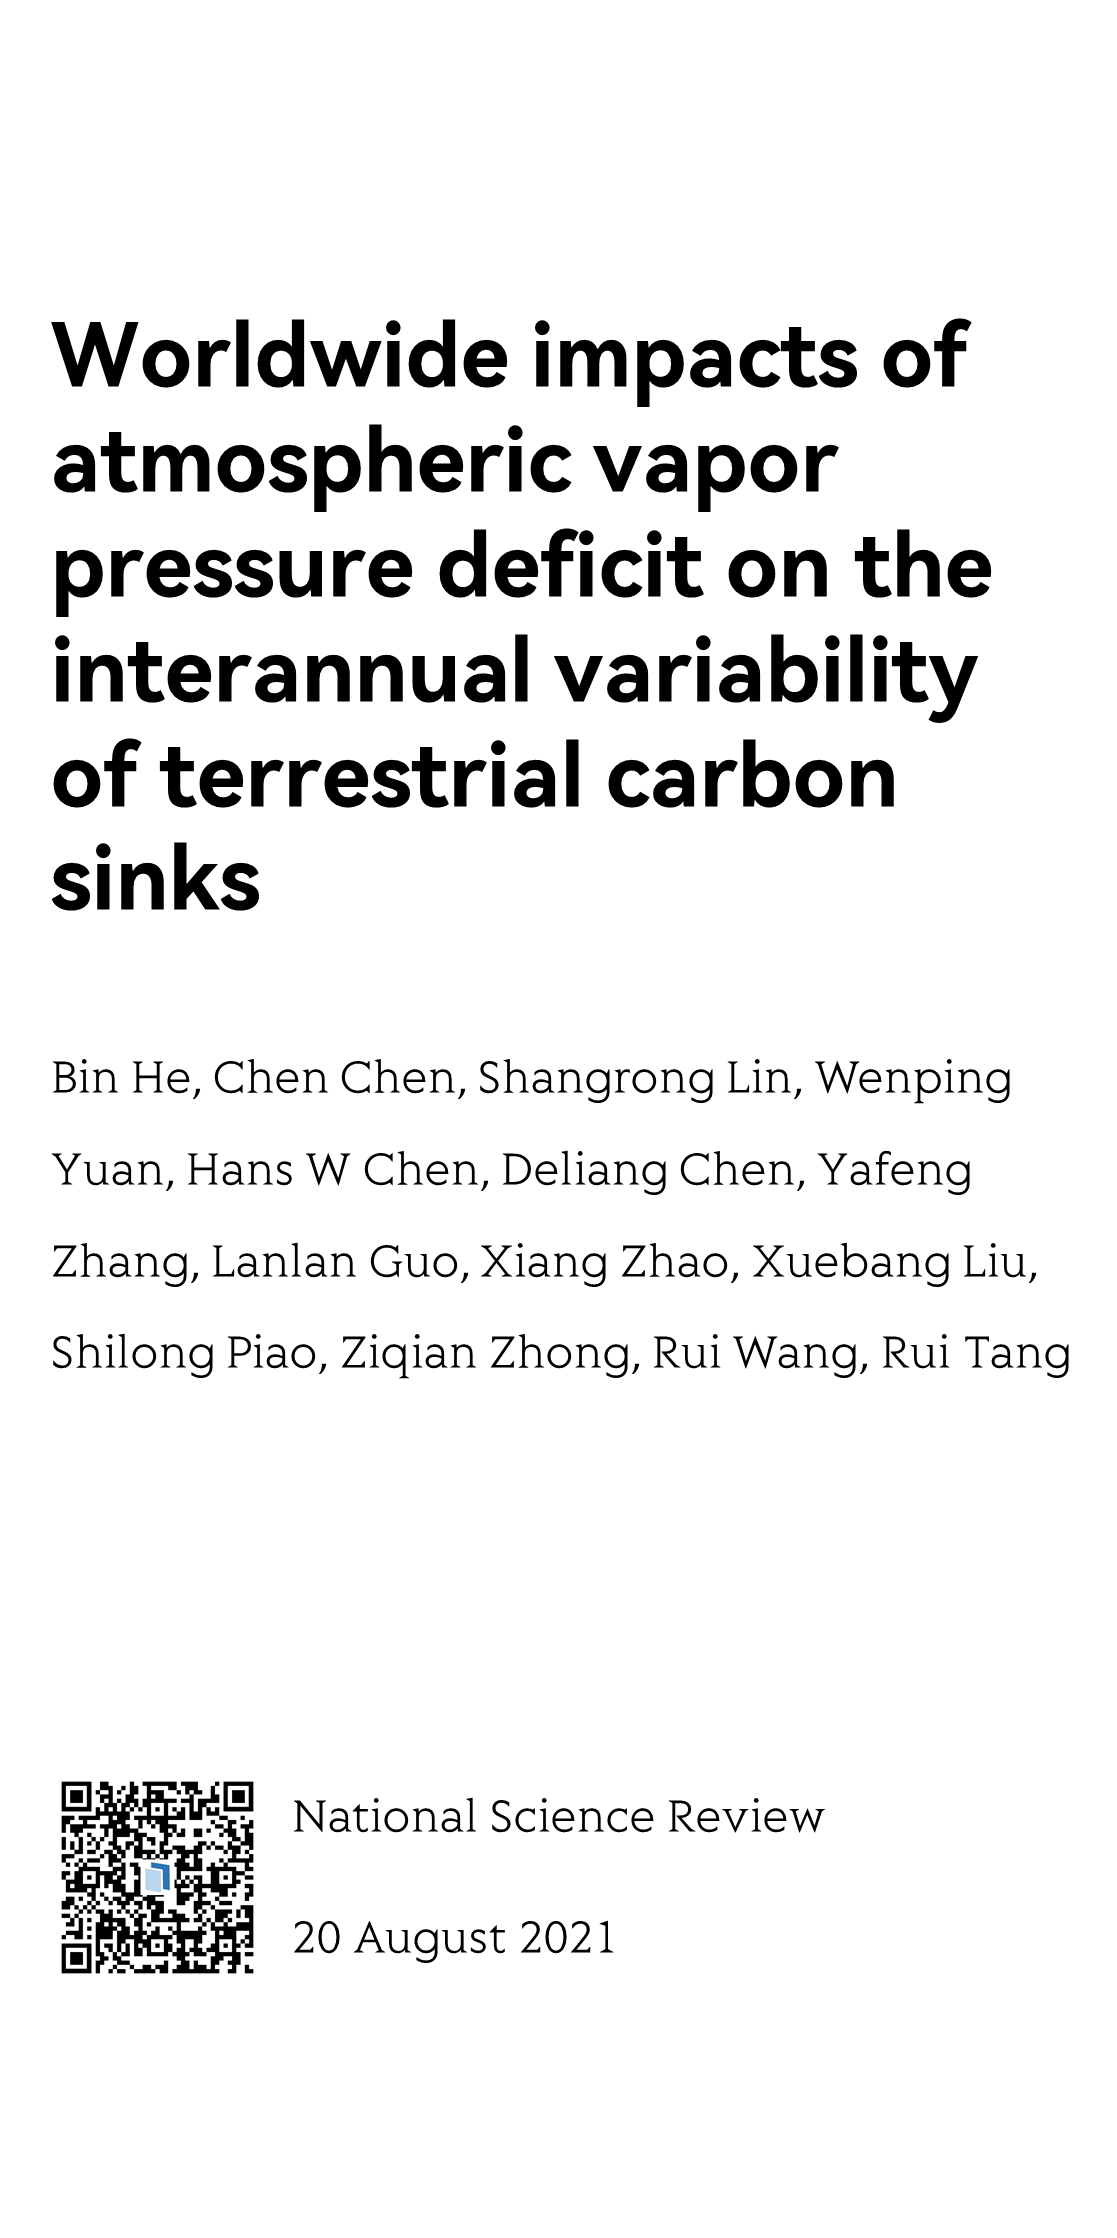 Worldwide impacts of atmospheric vapor pressure deficit on the interannual variability of terrestrial carbon sinks_1